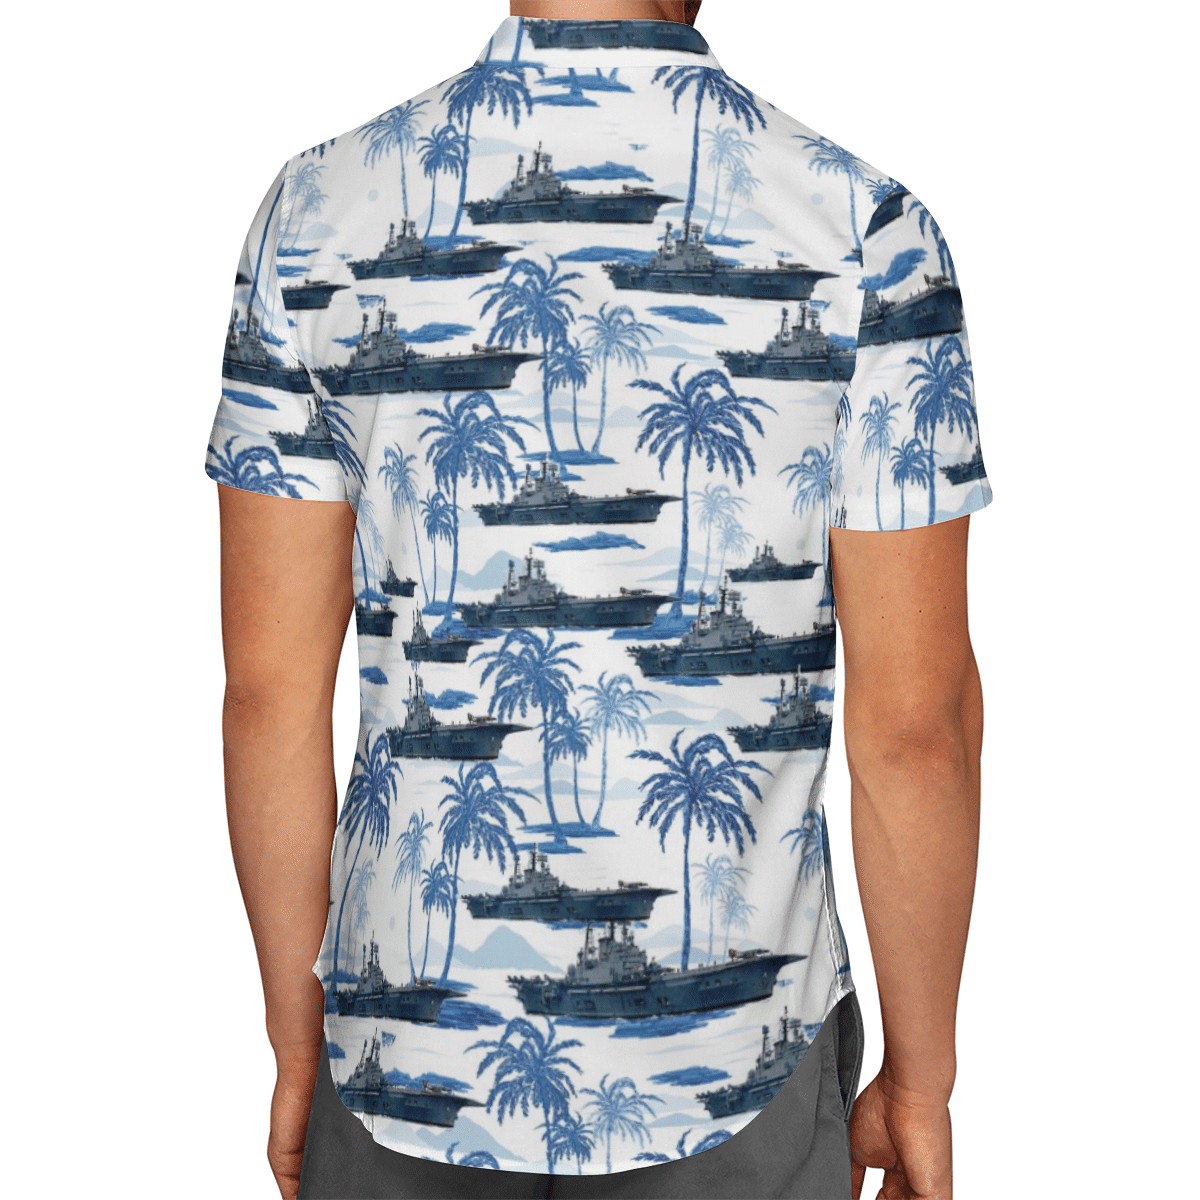 Going to the beach with a quality shirt 72